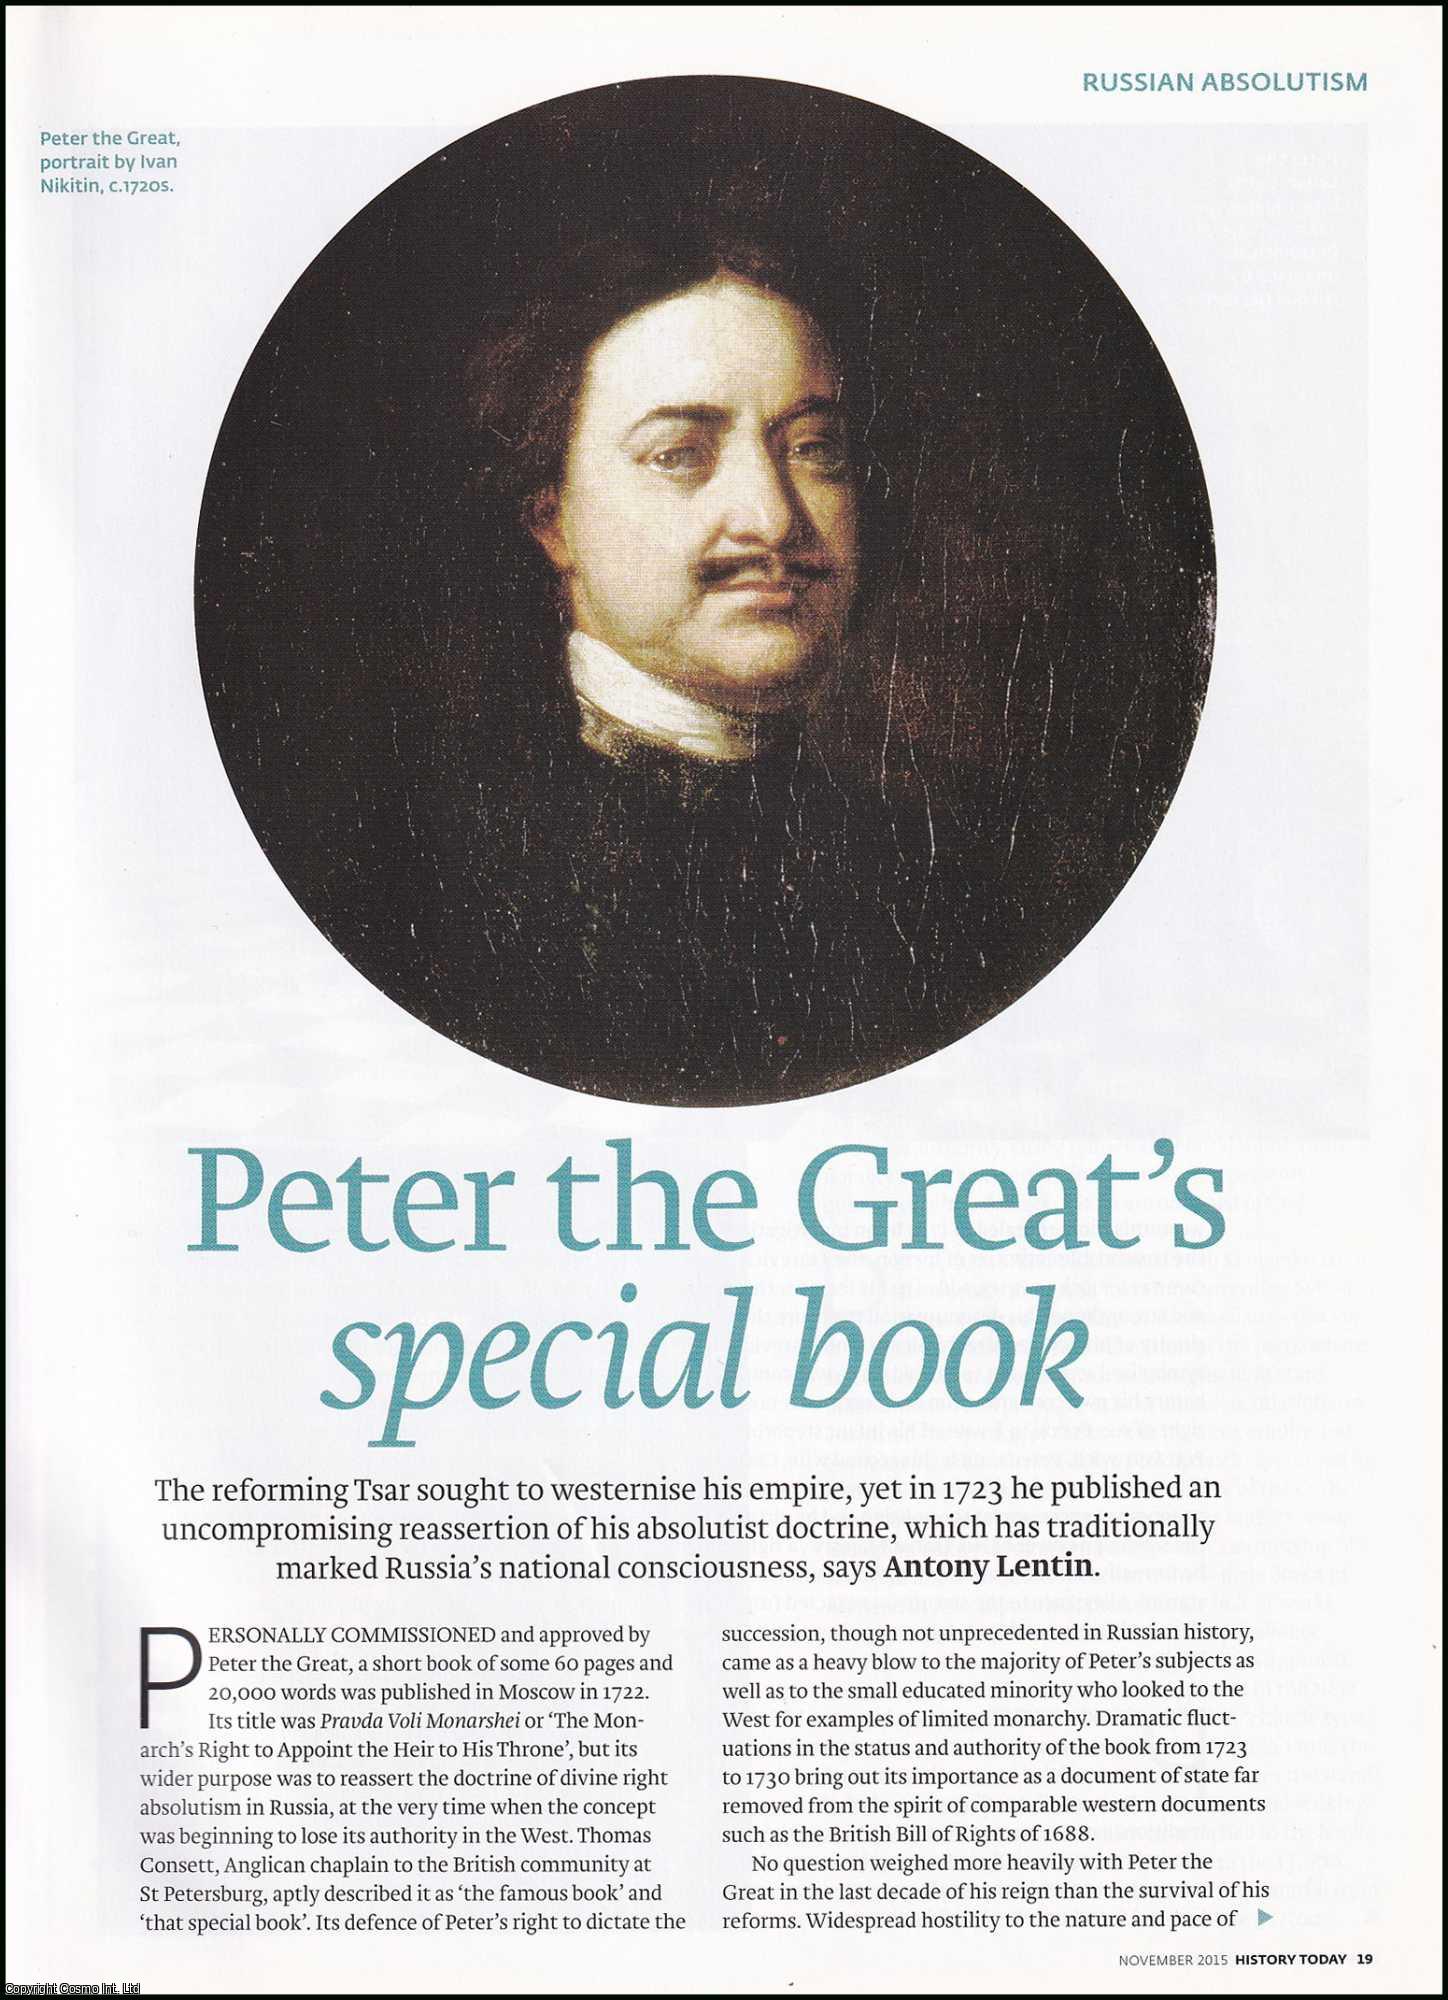 Antony Lentin - The Tsar's Special Book: Peter the Great's Bid for Absolute Power. An original article from History Today magazine, 2015.